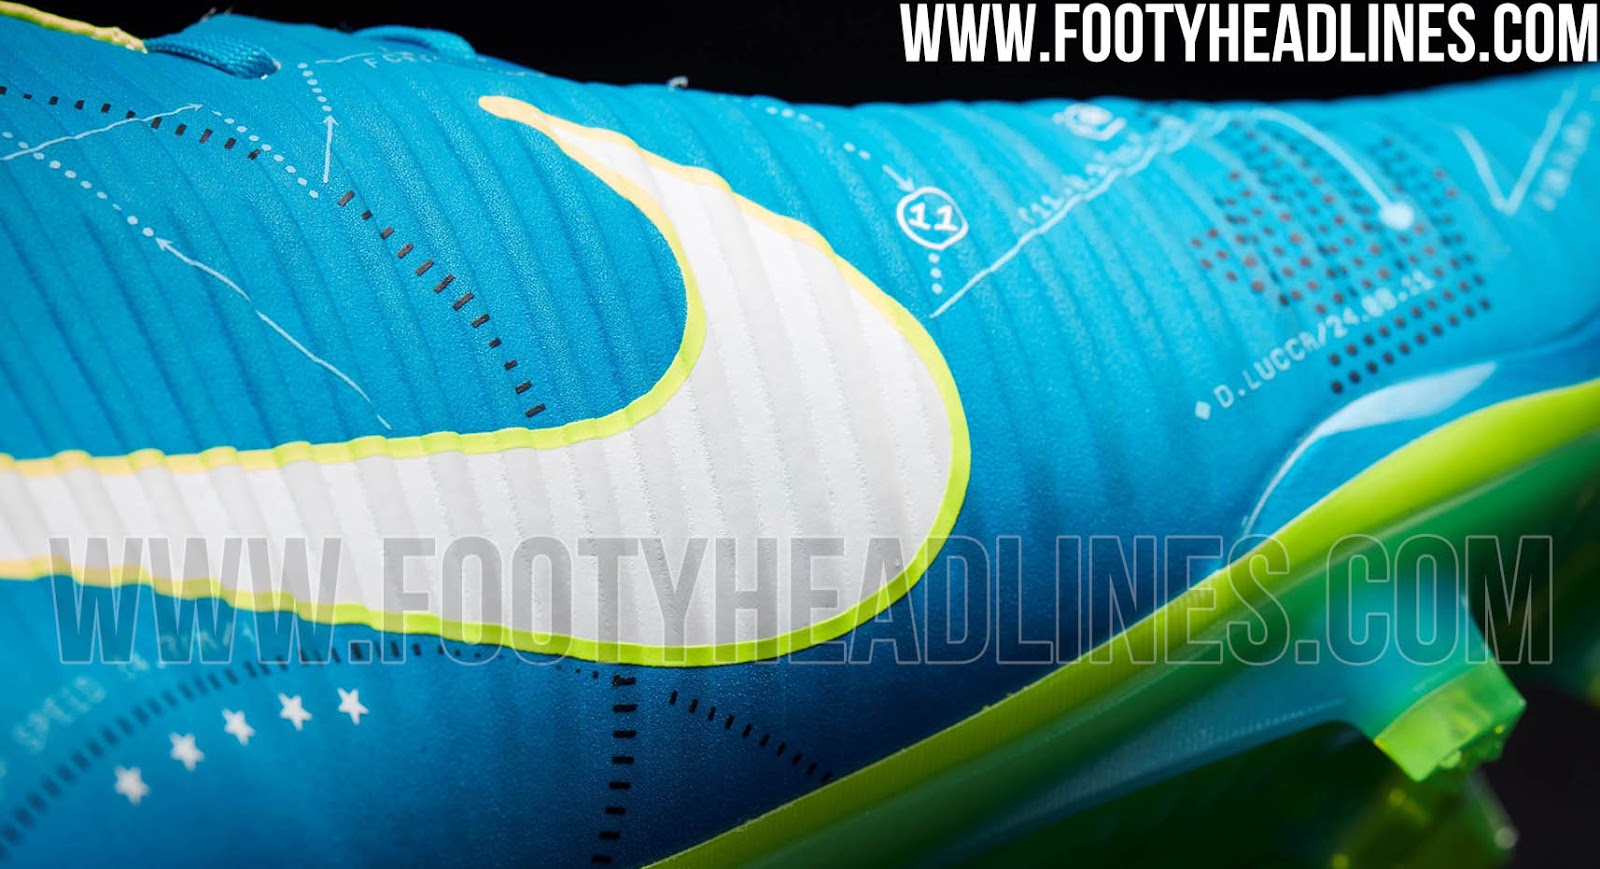 How To Customize Your Nike Mercurial Vapor In 5 Minutes